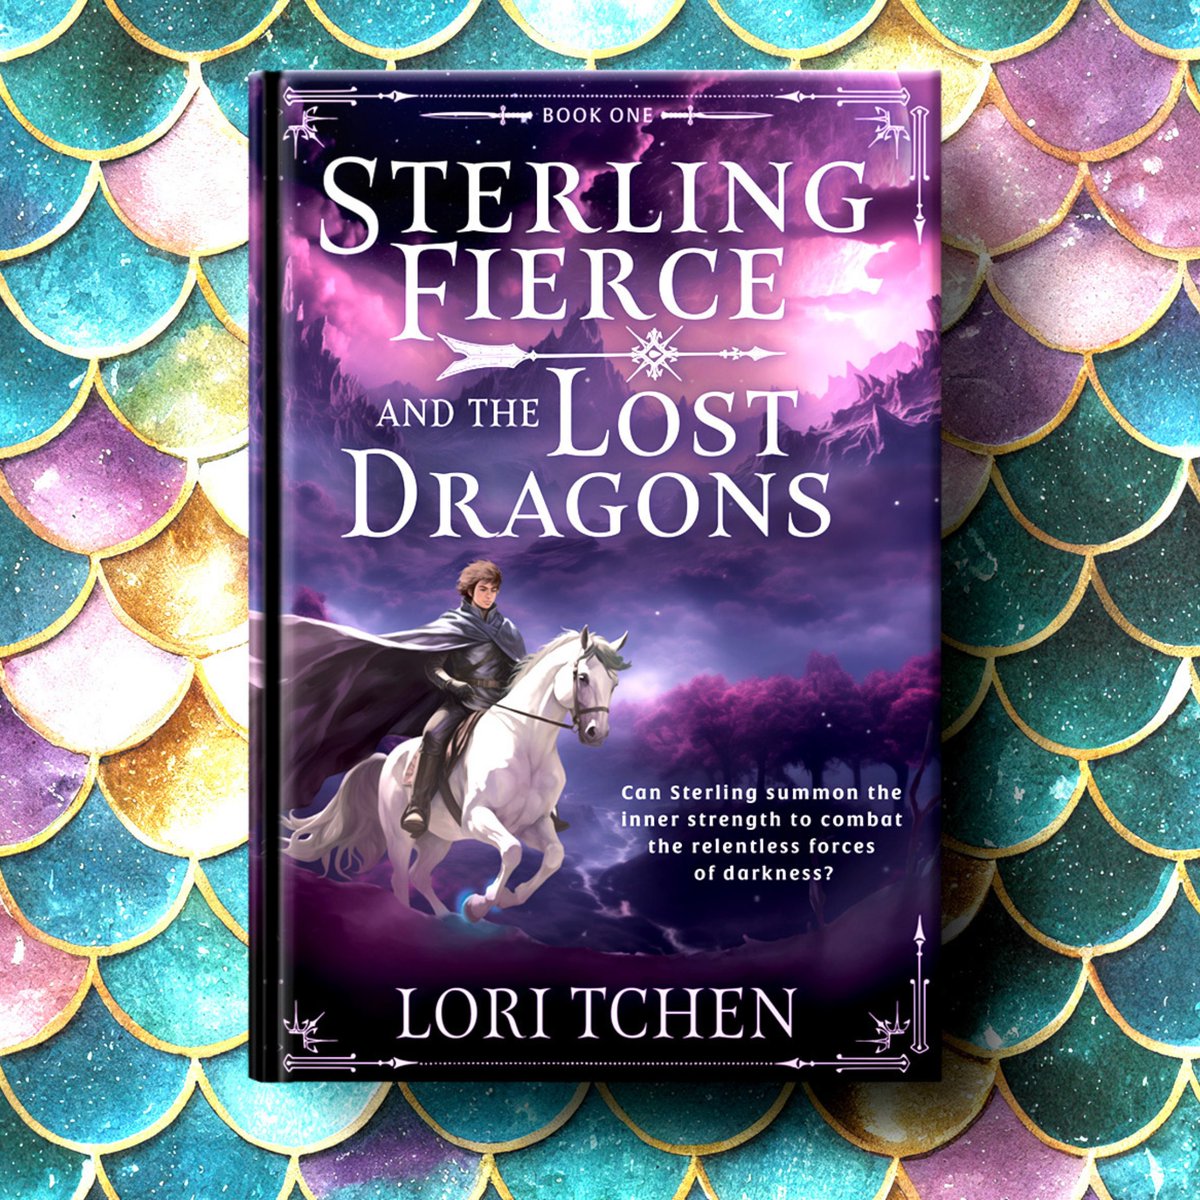 POV: You're a fourteen-year-old witch hunter who is sent on a quest to unlock a terrible curse that threatens the land.

The Sterling Fierce saga is now available on Amazon and Kindle Unlimited!